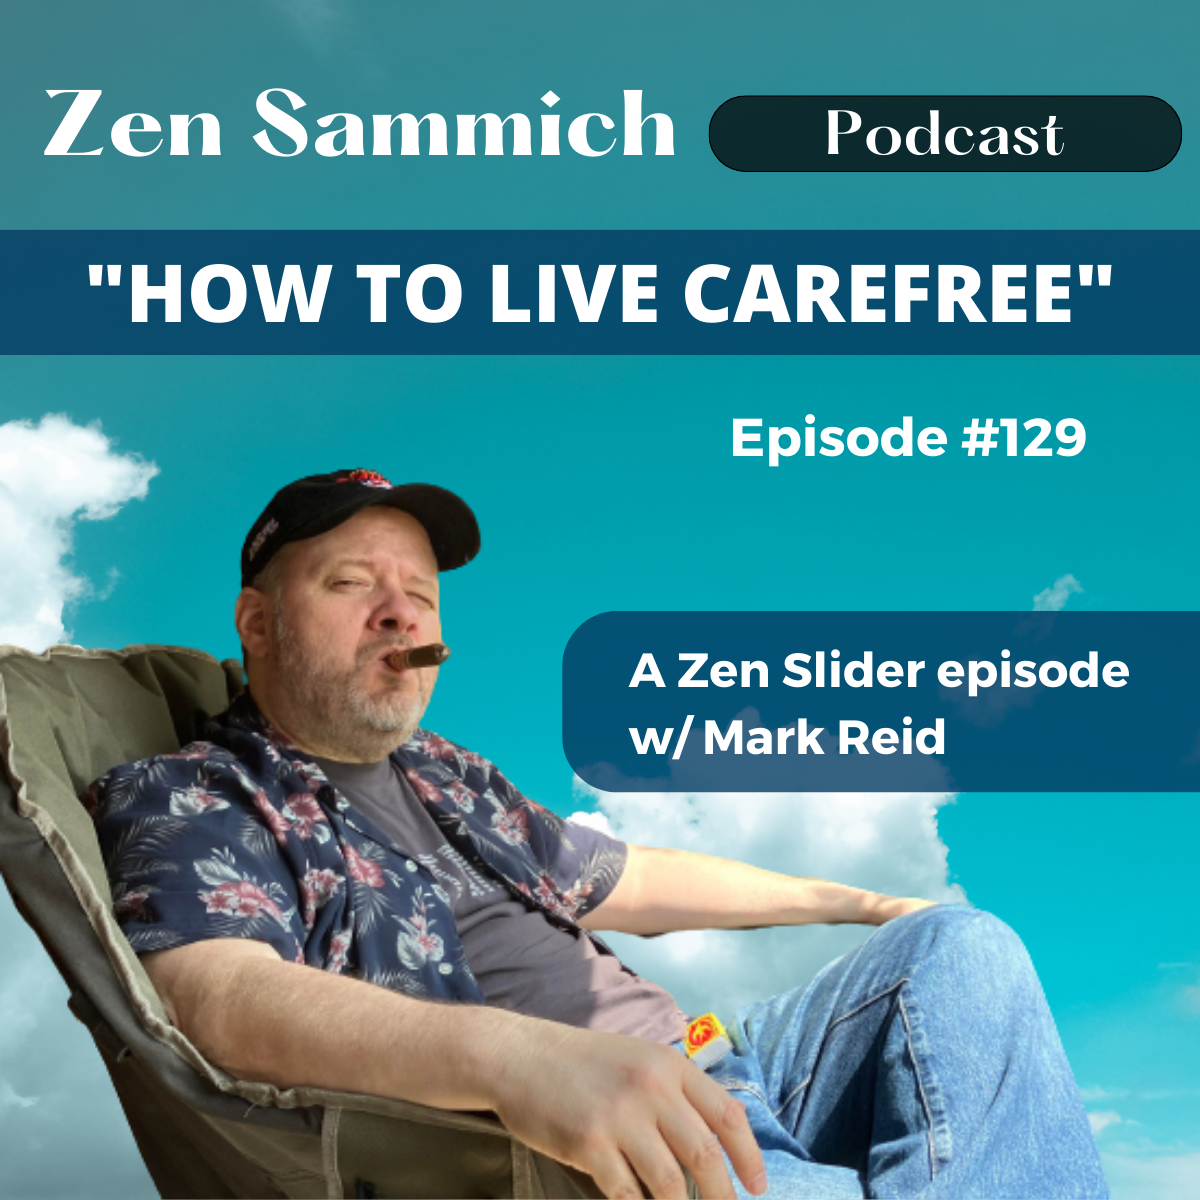 How to live carefree zen sammich